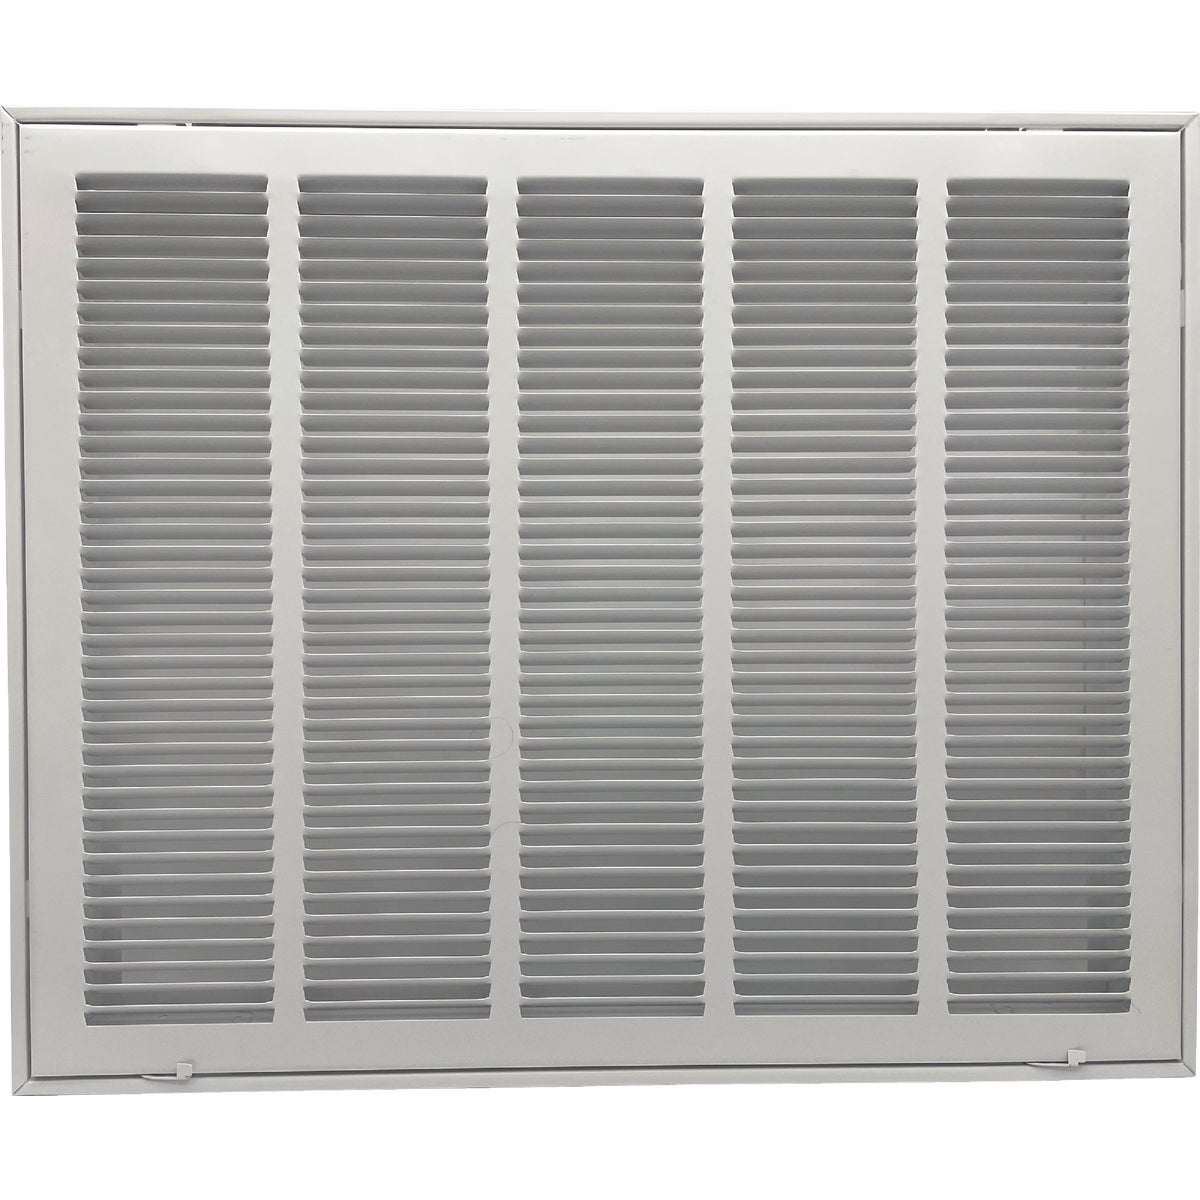 Ameriflow 25 In. x 20 In. White Filter Grille